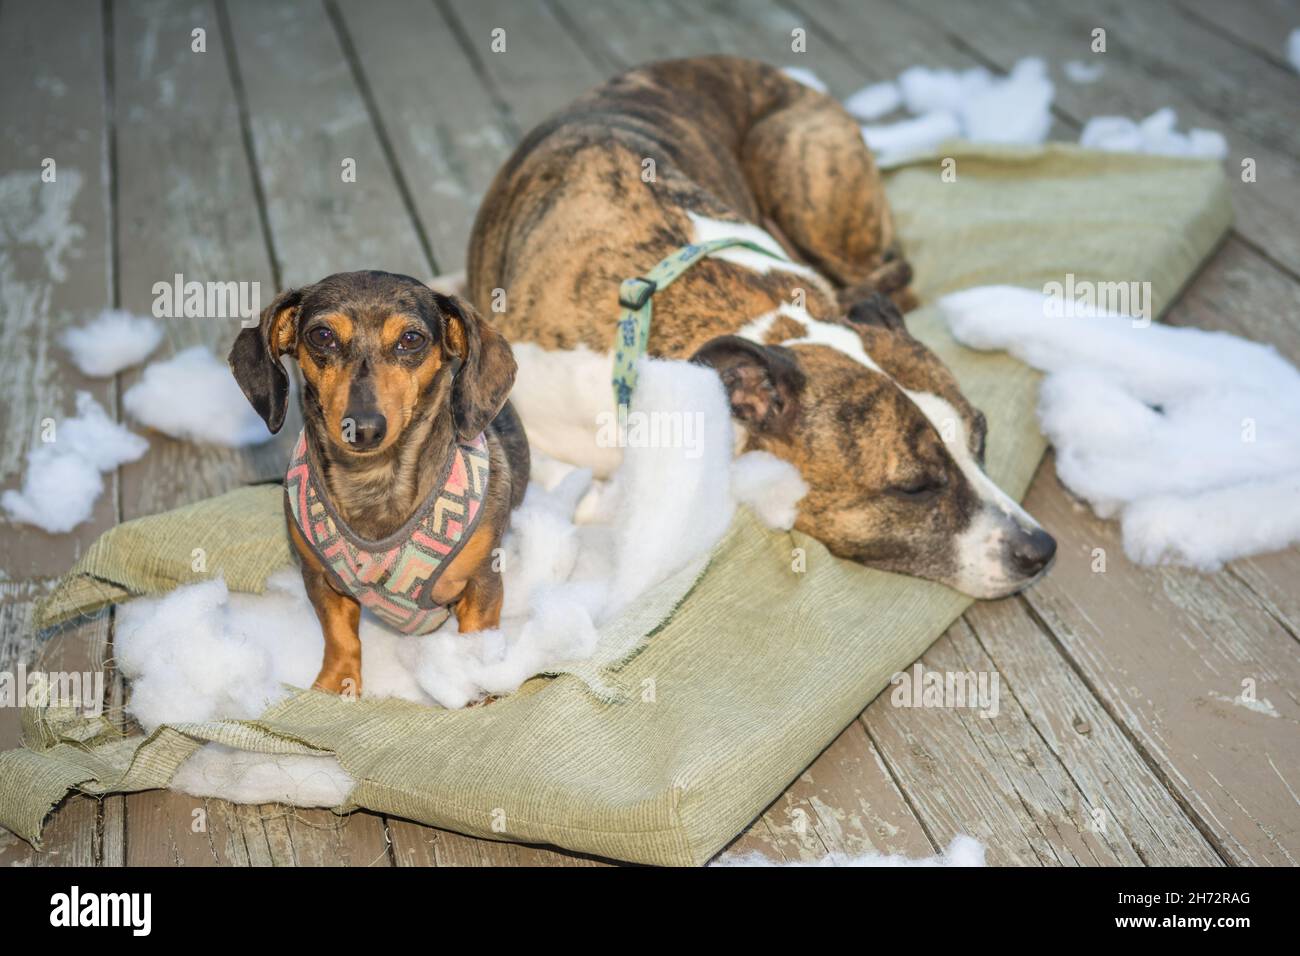 Dogs Destroy Lawn Furniture Stock Photo